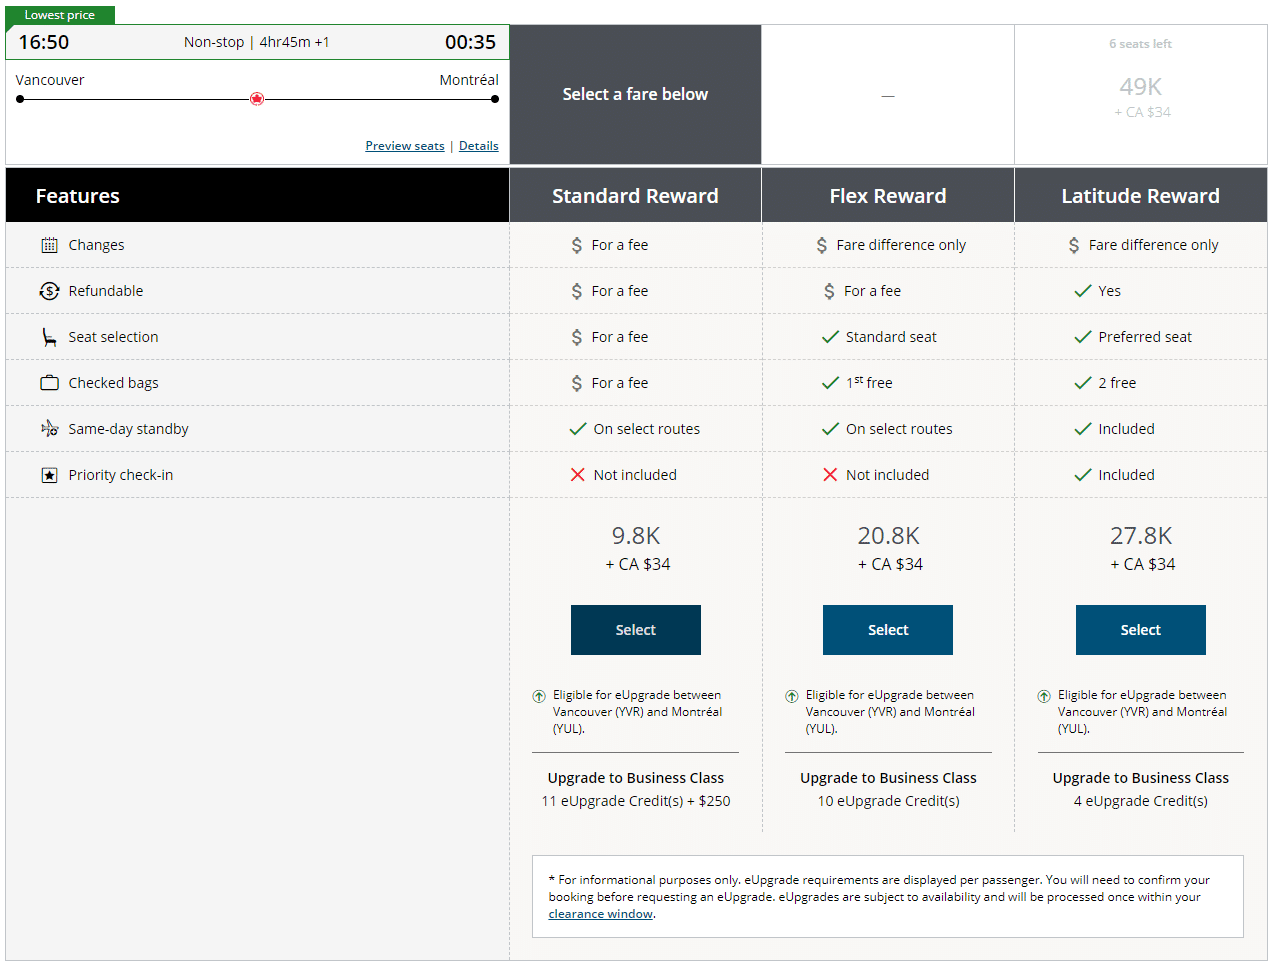 Example showing eUpgrade options for Aeroplan award flight between Vancouver and Montreal. 